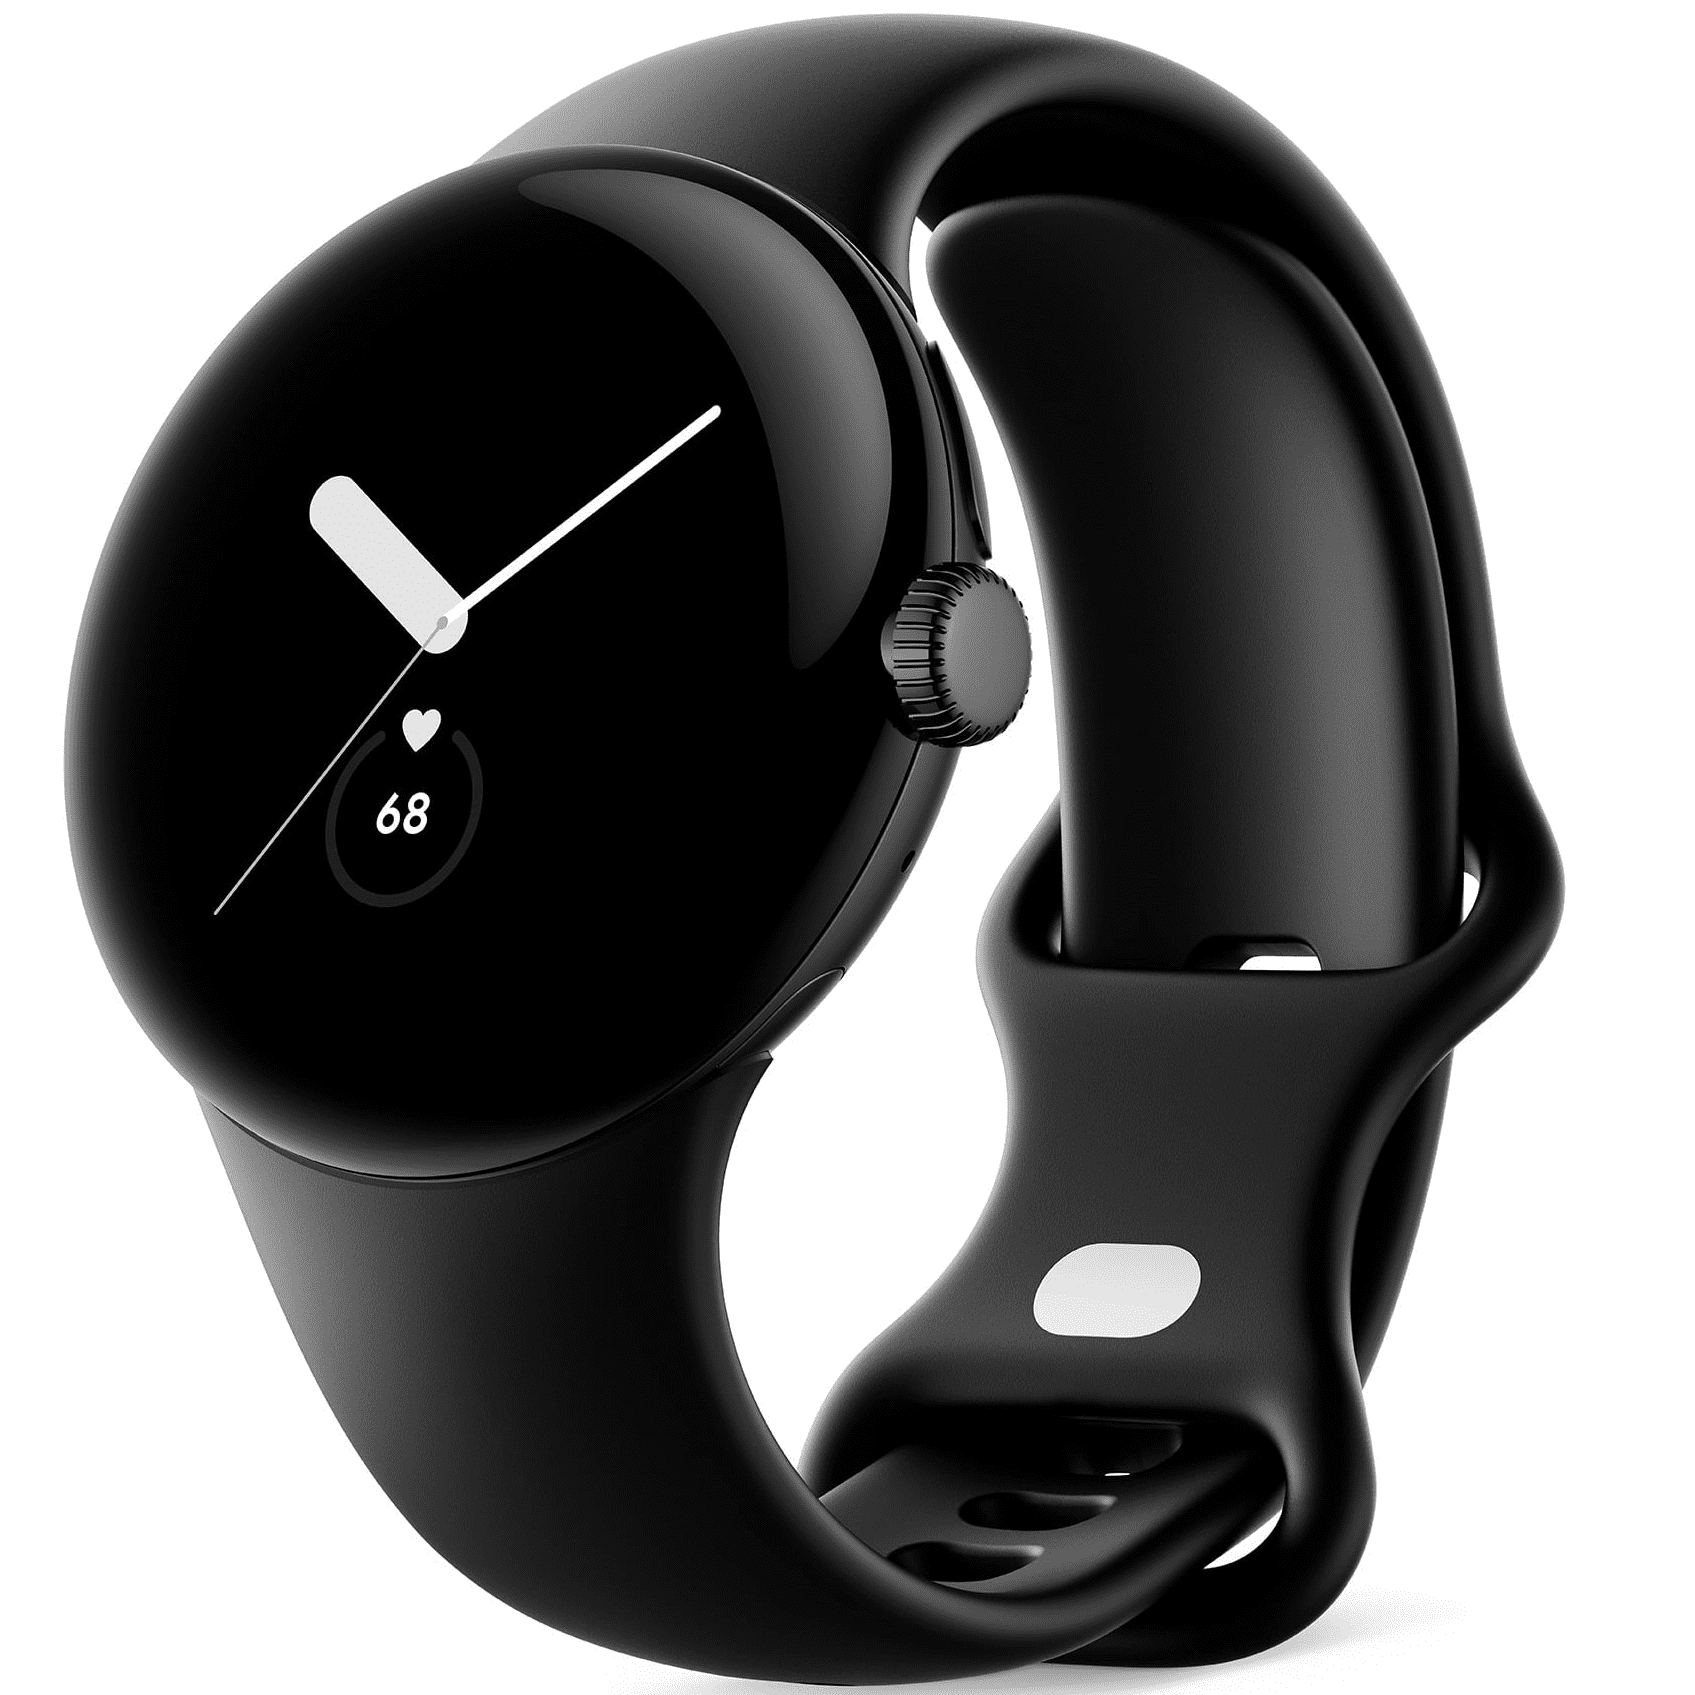 Google Pixel Watch - Android Smartwatch with Activity Tracking 